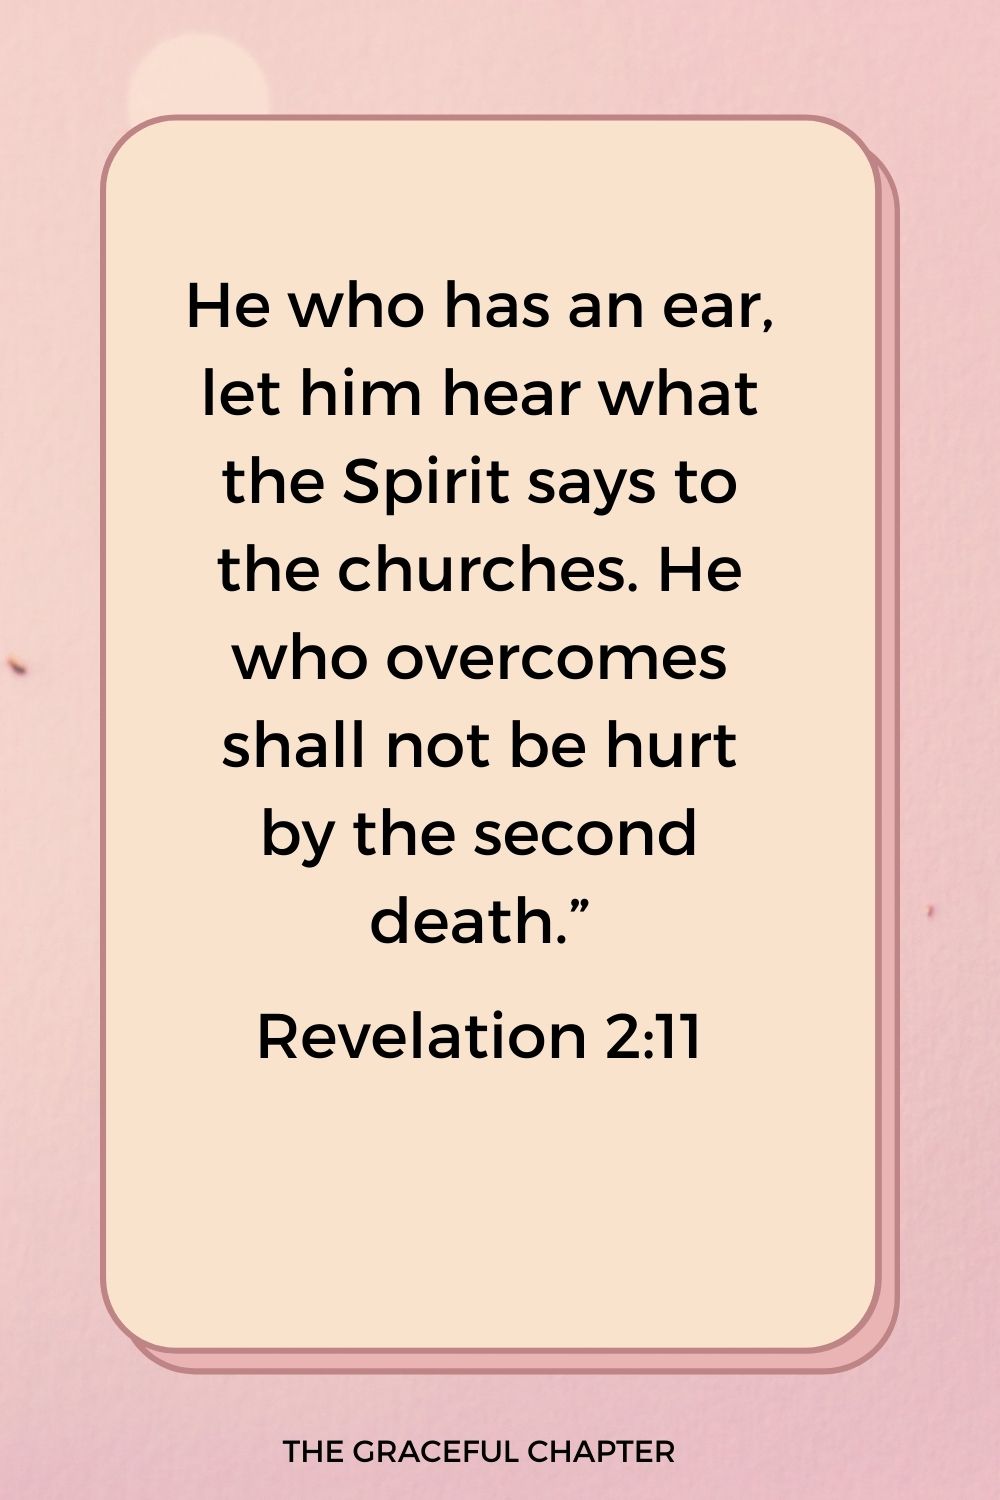 He who has an ear, let him hear what the Spirit says to the churches. He who overcomes shall not be hurt by the second death.” Revelation 2:11